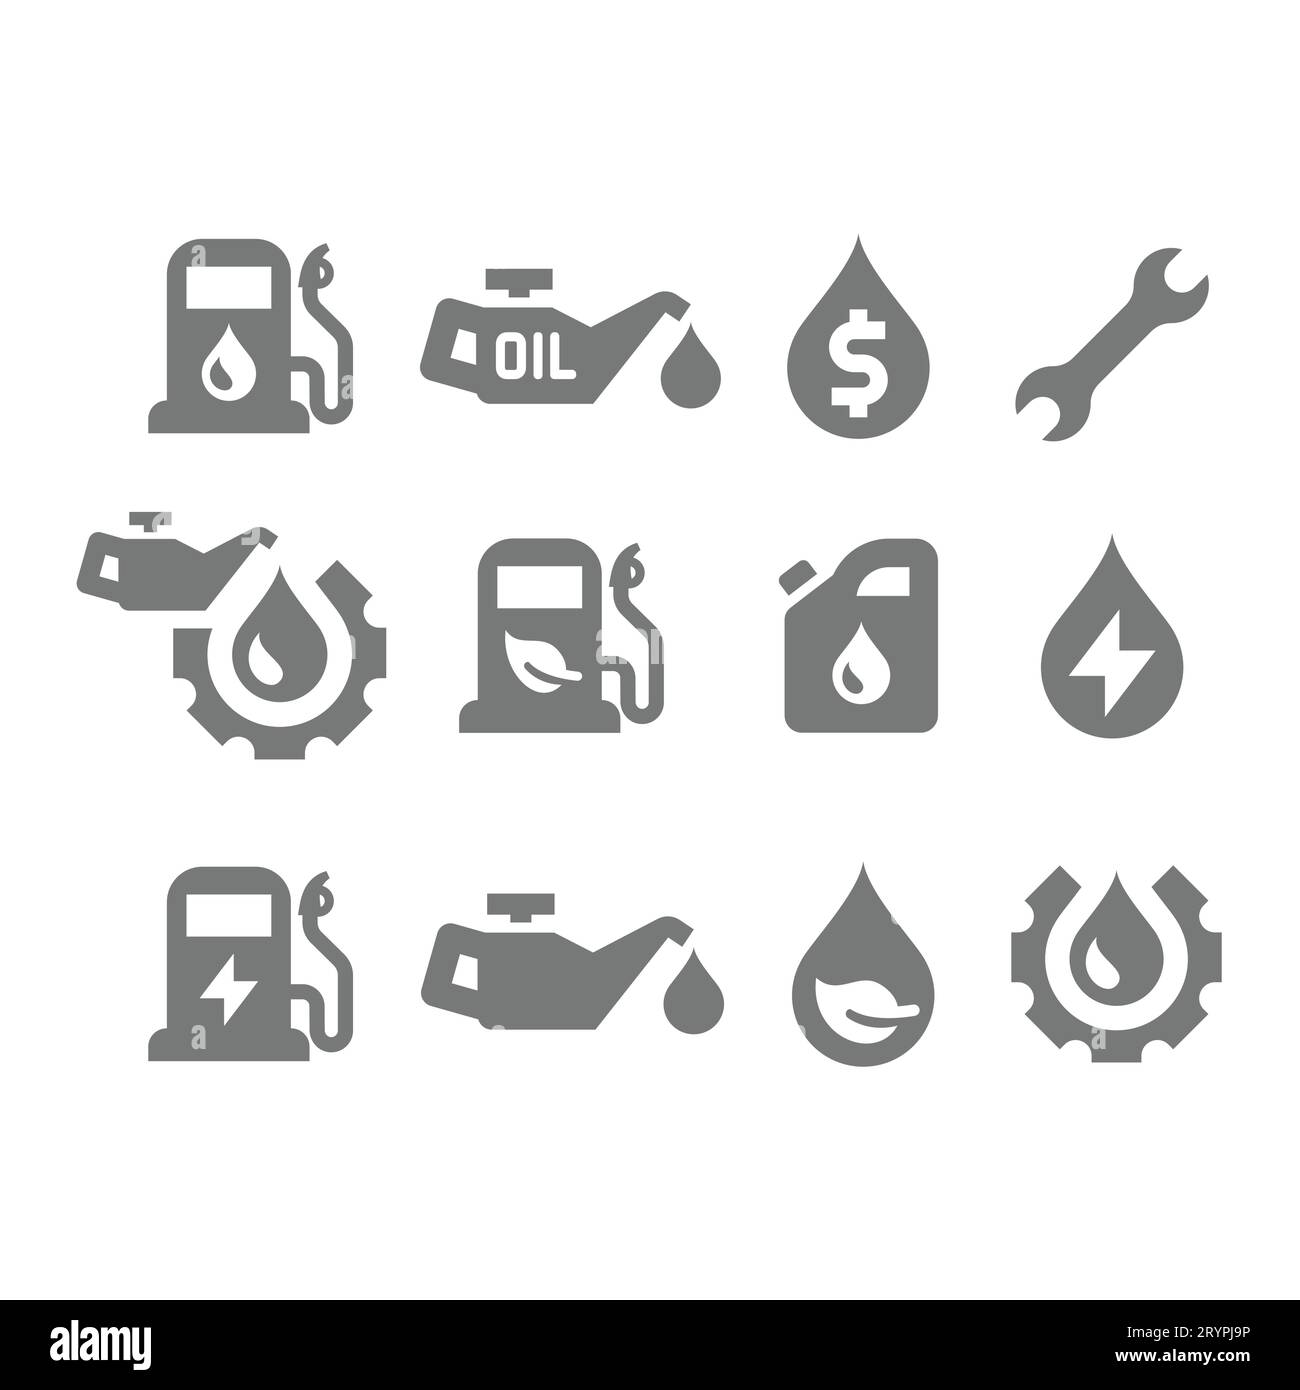 Petrol, gas and motor oil vector icon set. Gasoline, fuel station icons. Stock Vector